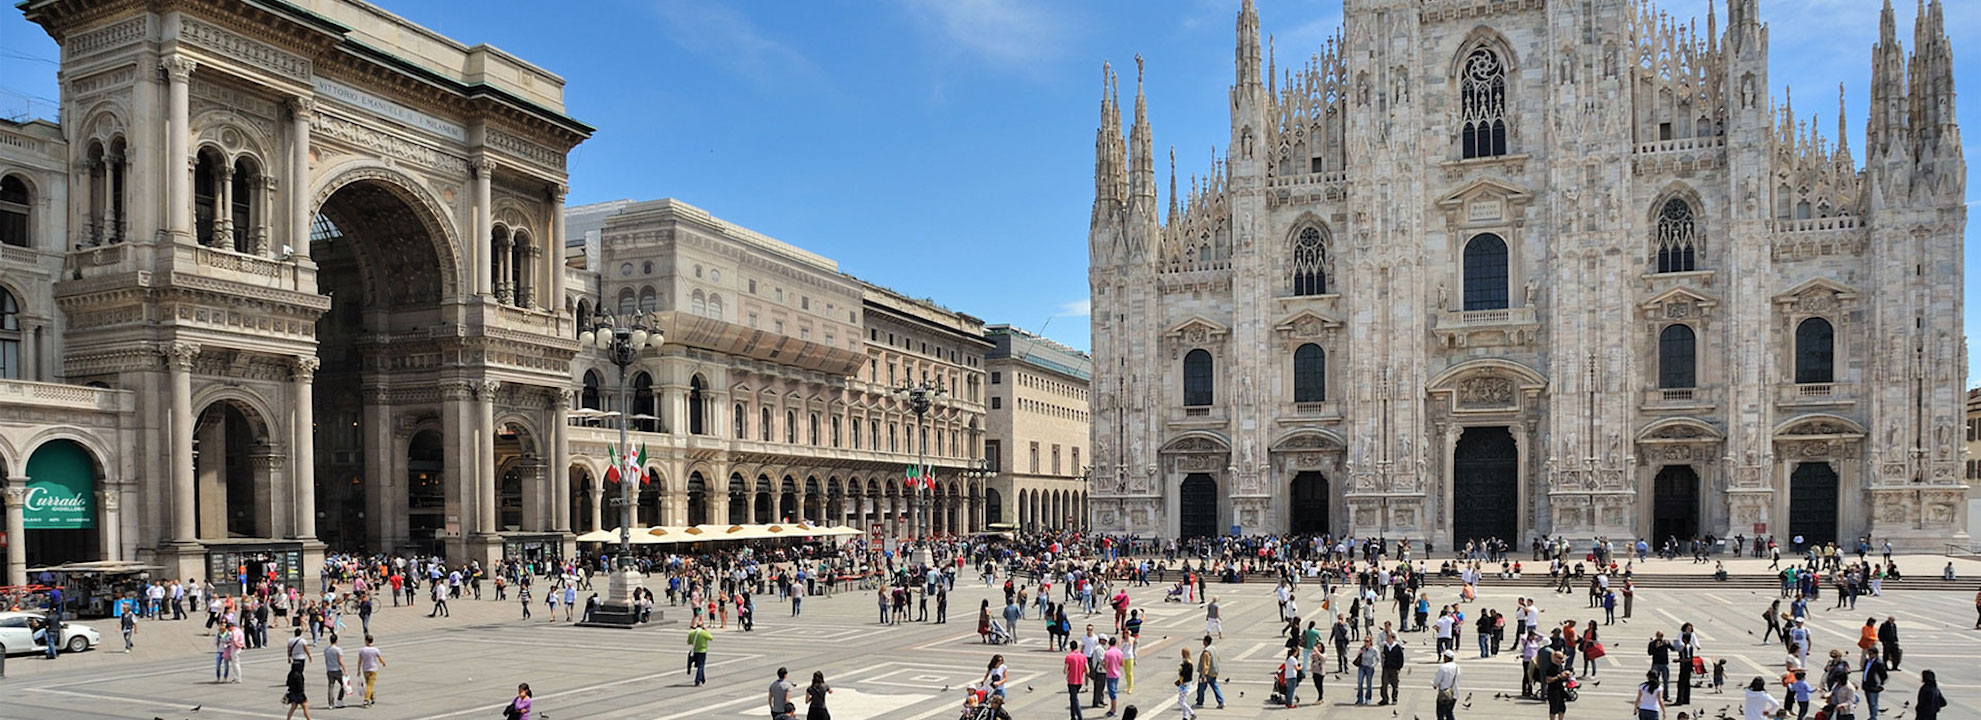 11D The best of Italian cities by train and private transfers, Private Premium tour 5 star hotel and services.